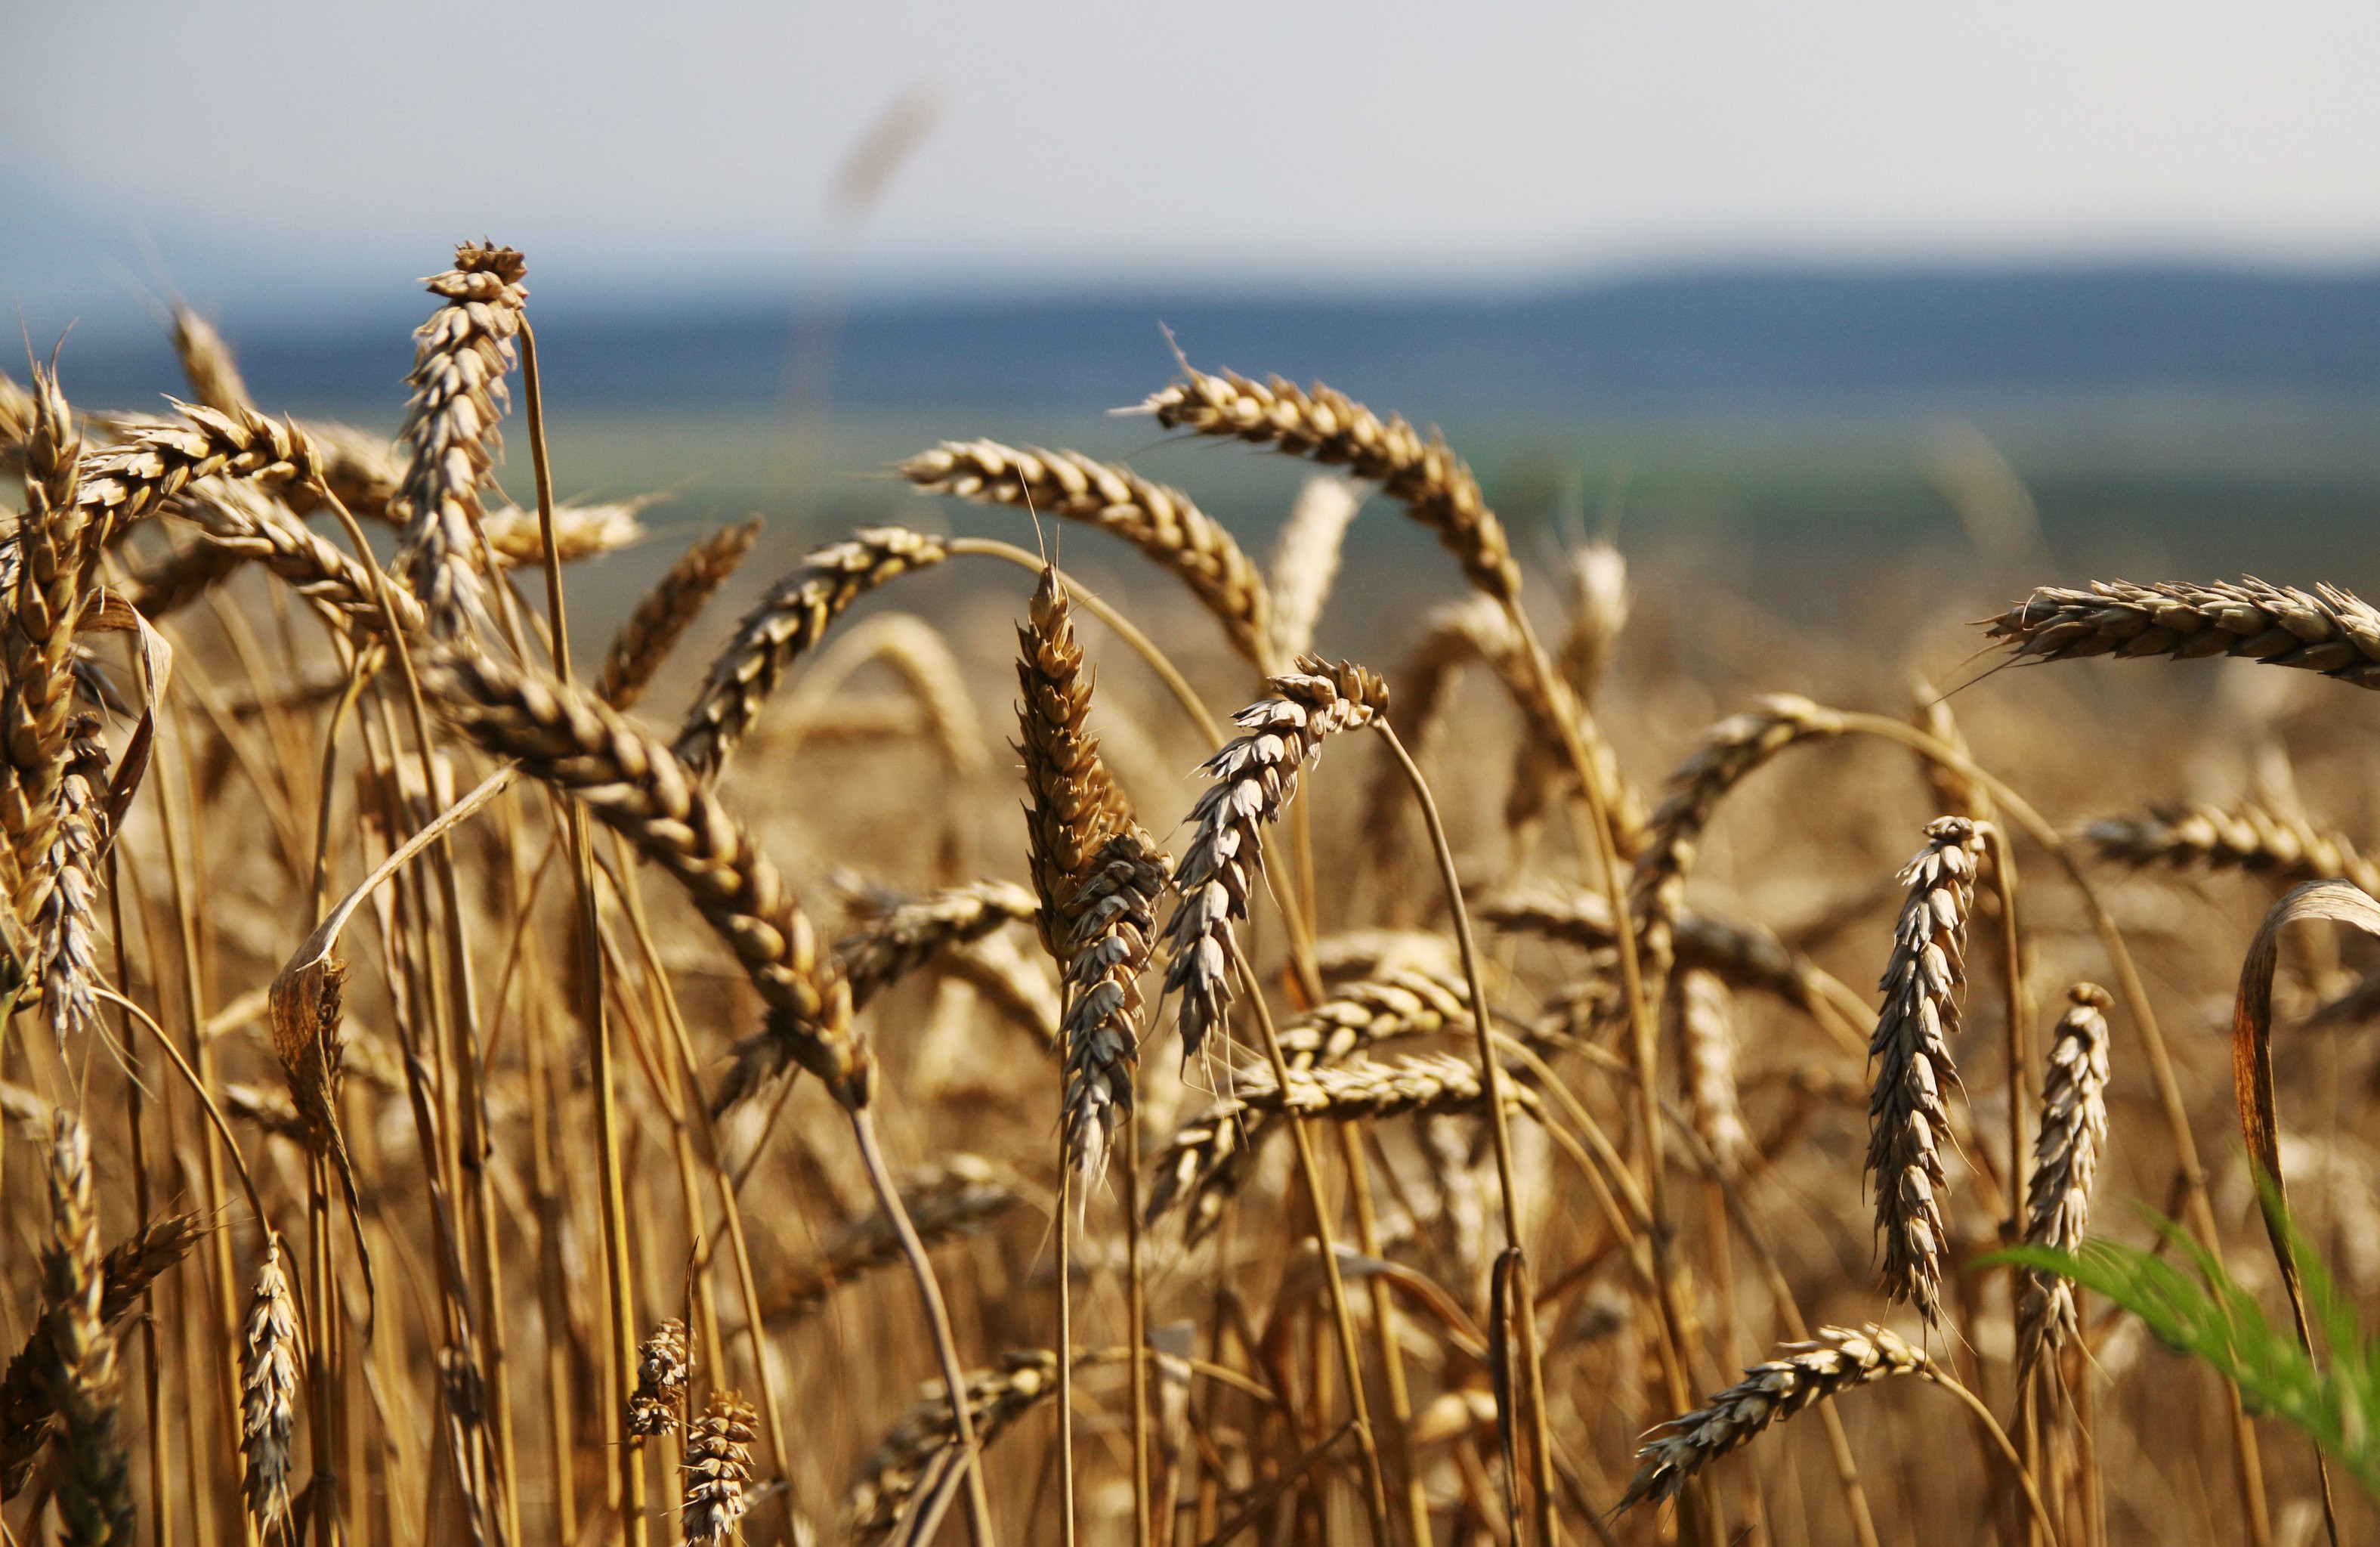 Wheat prices have risen amid concerns about Russia's export ban